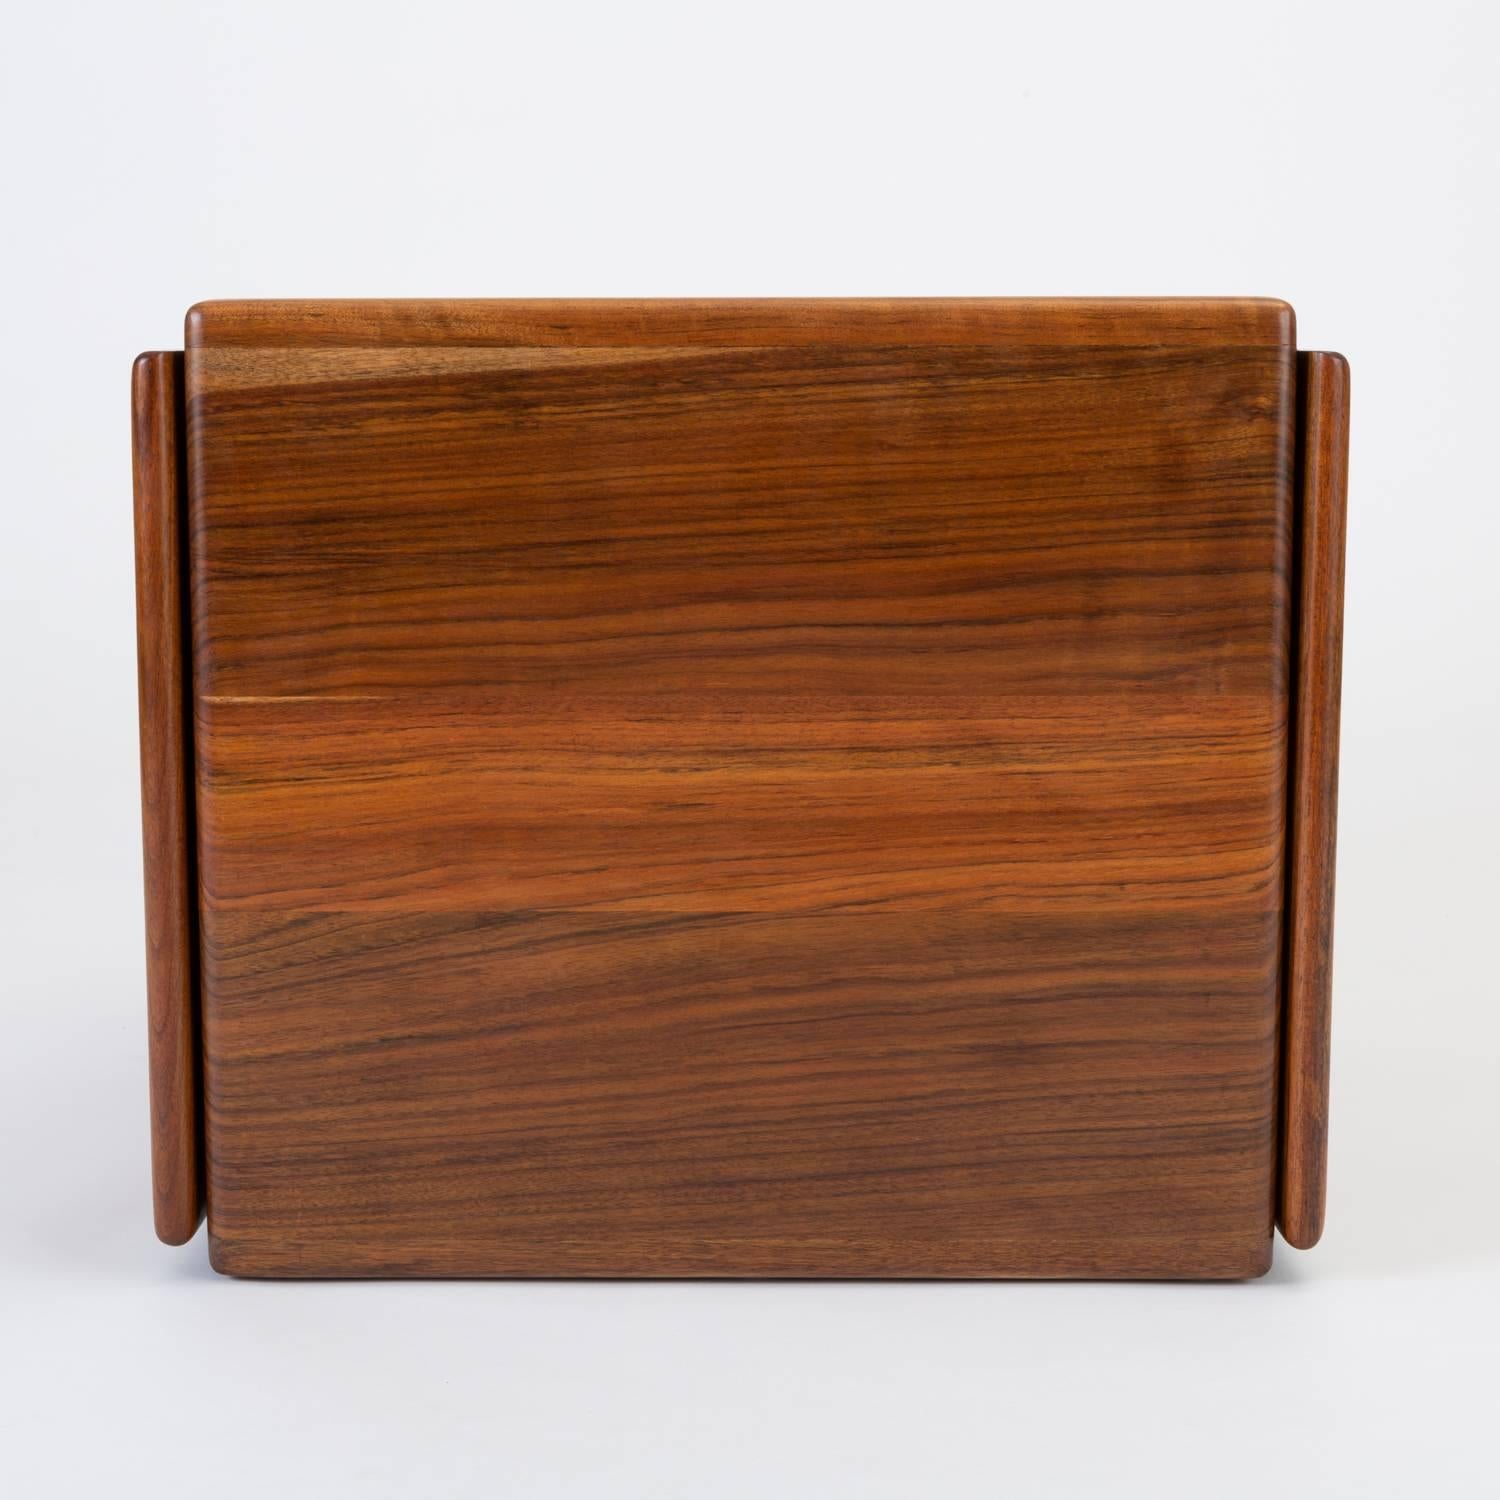 20th Century Cube Side Table or Storage Chest in Rare African Shedua Wood by Gerald McCabe